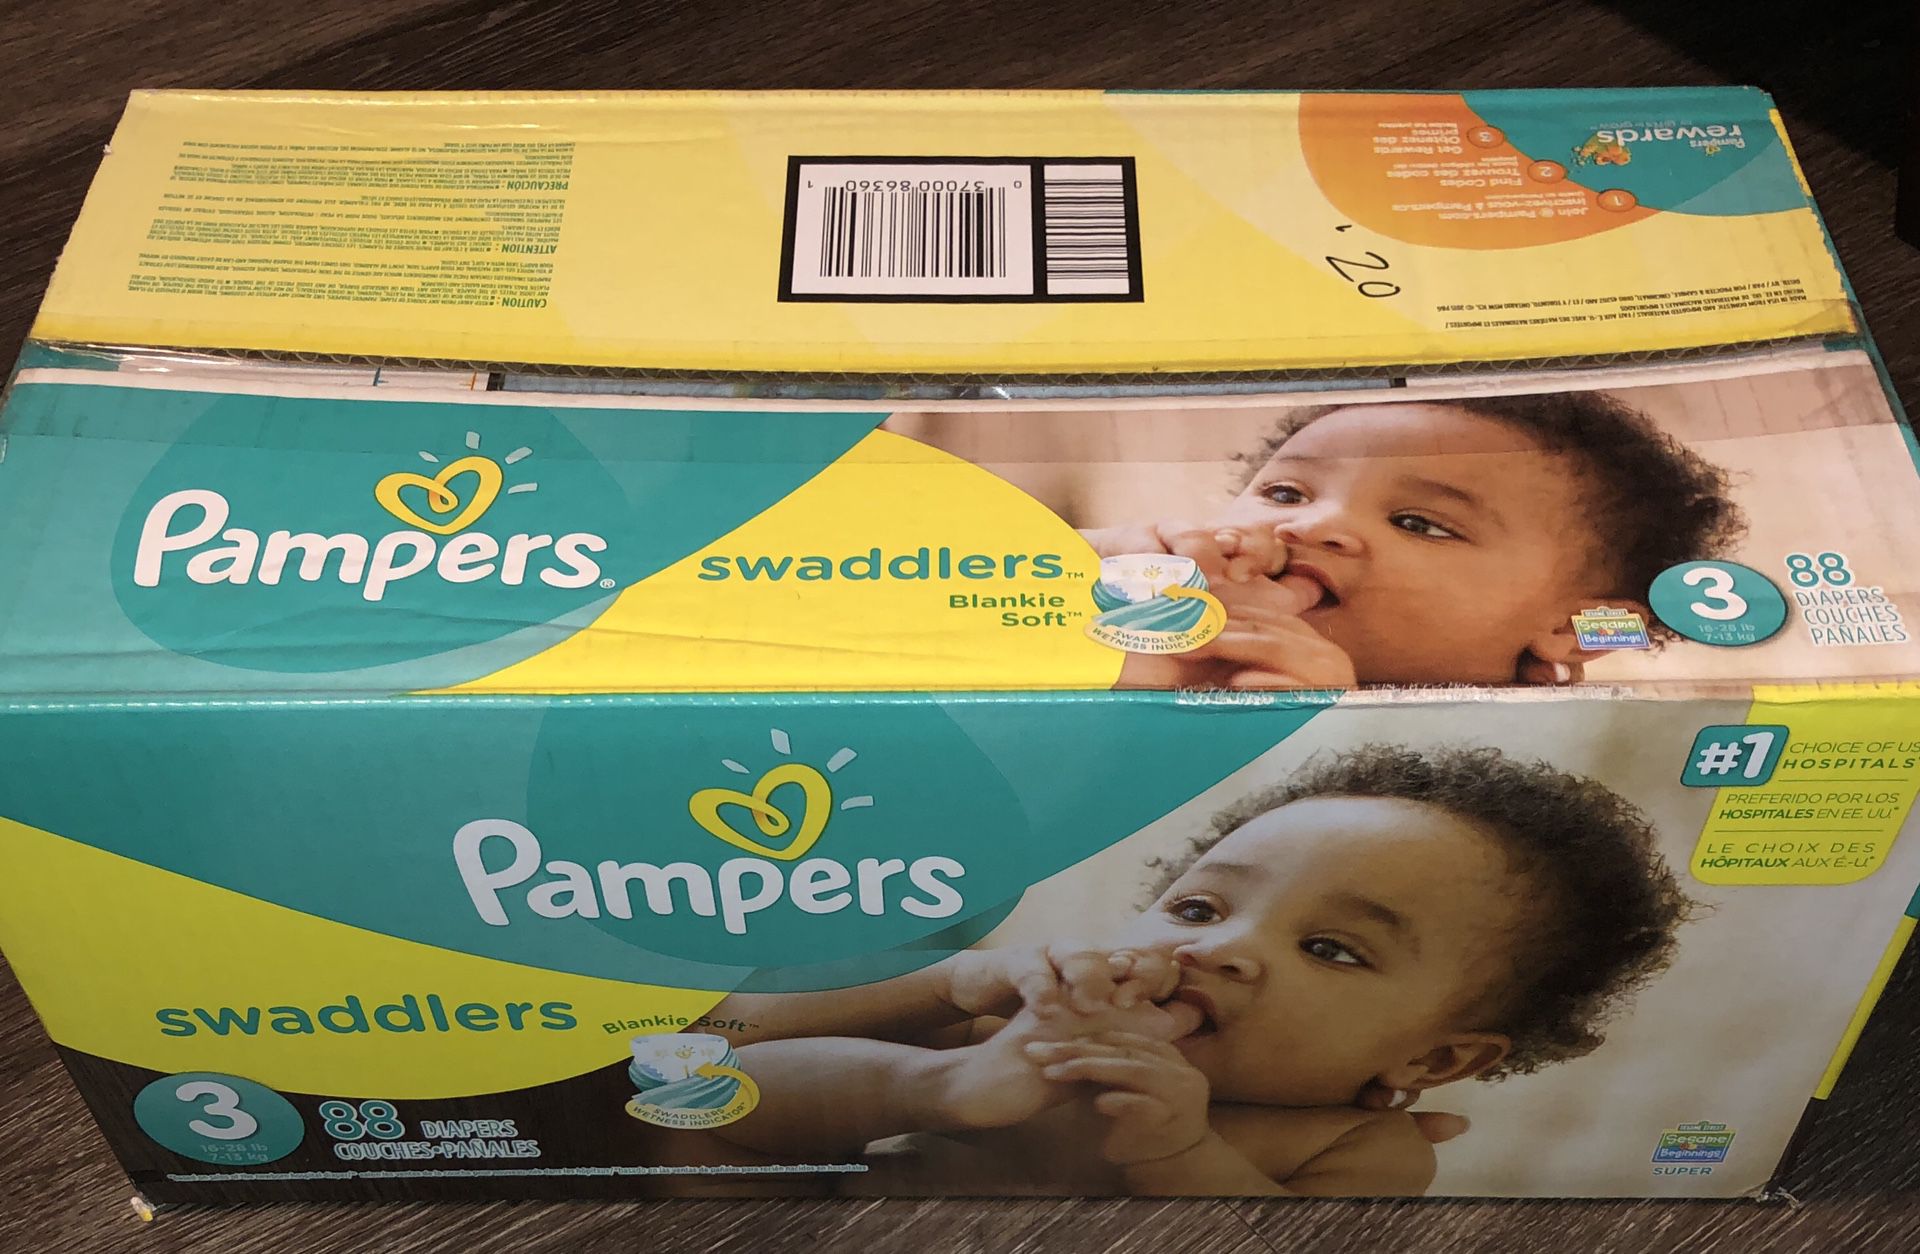 Pampers swaddlers (size 3)